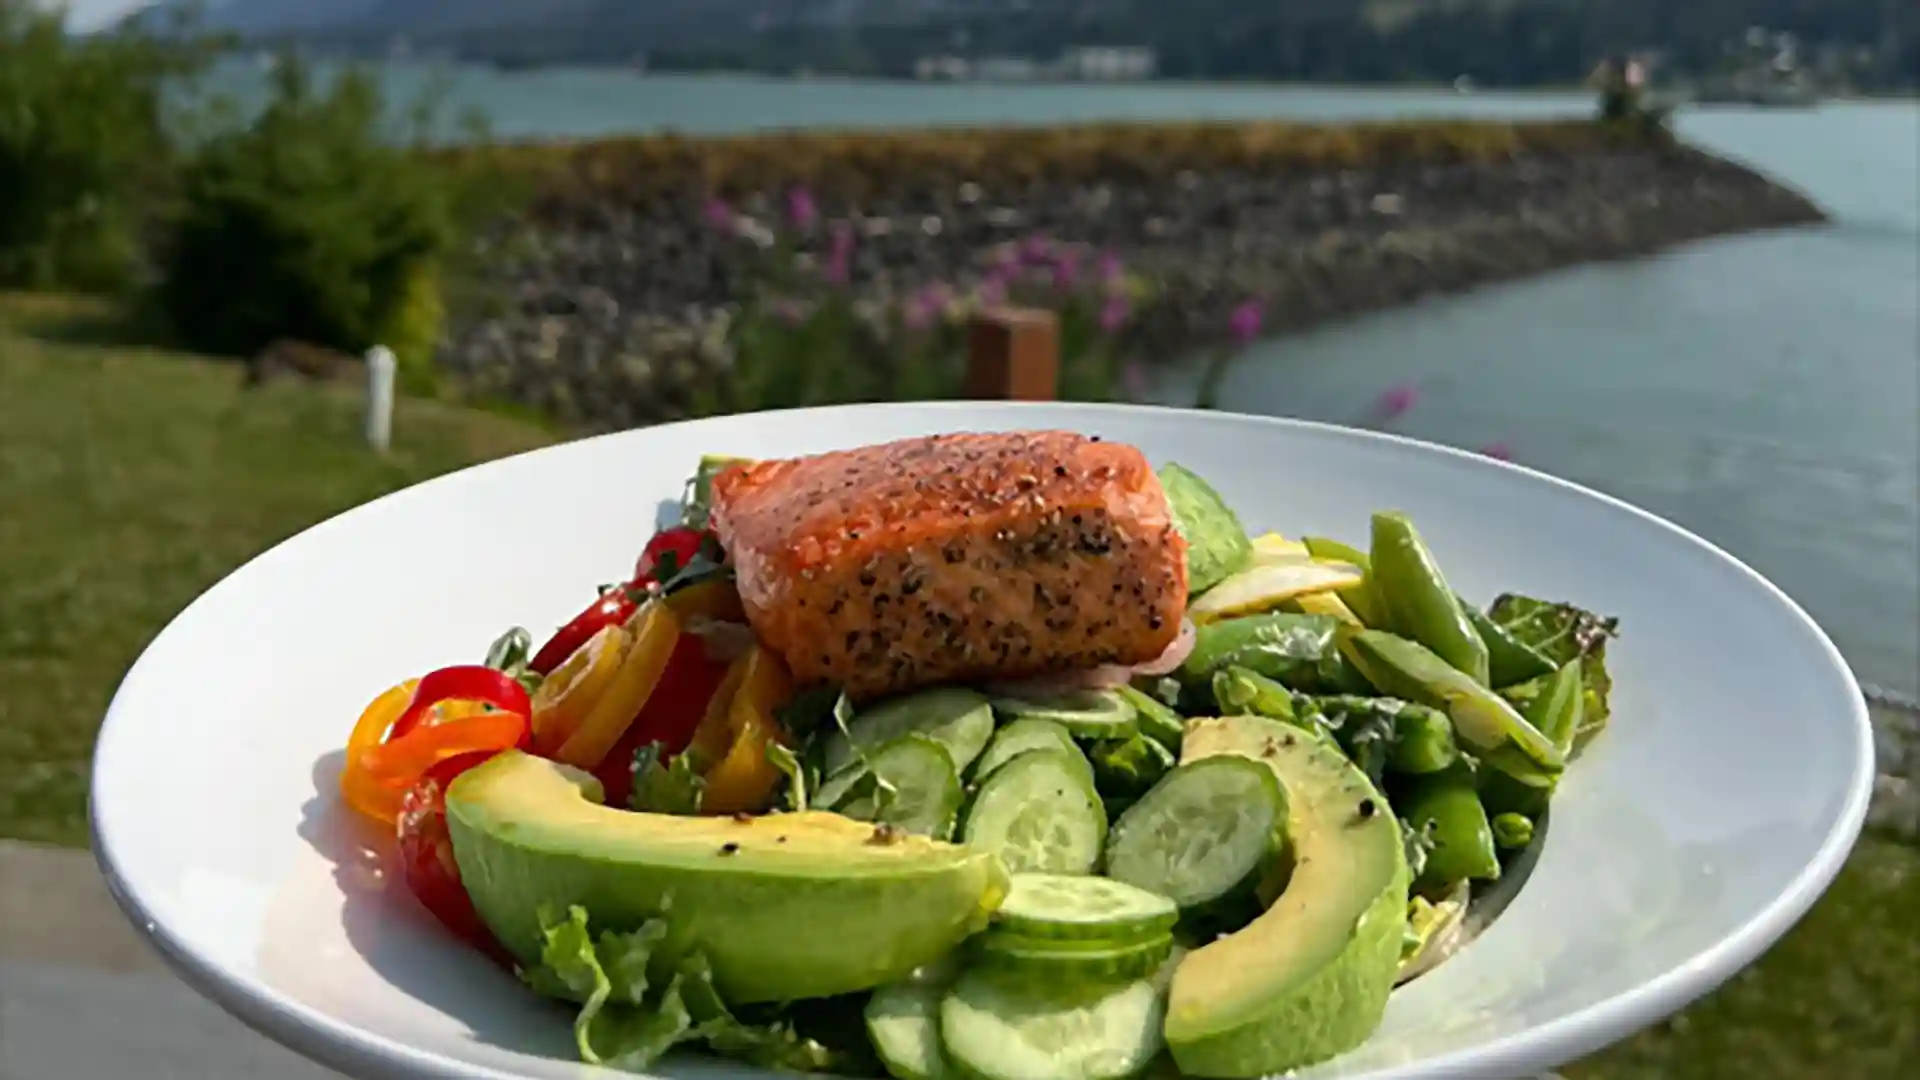 Cooked salmon and vegetables on plate with Alaska landscape and ocean waters in background.